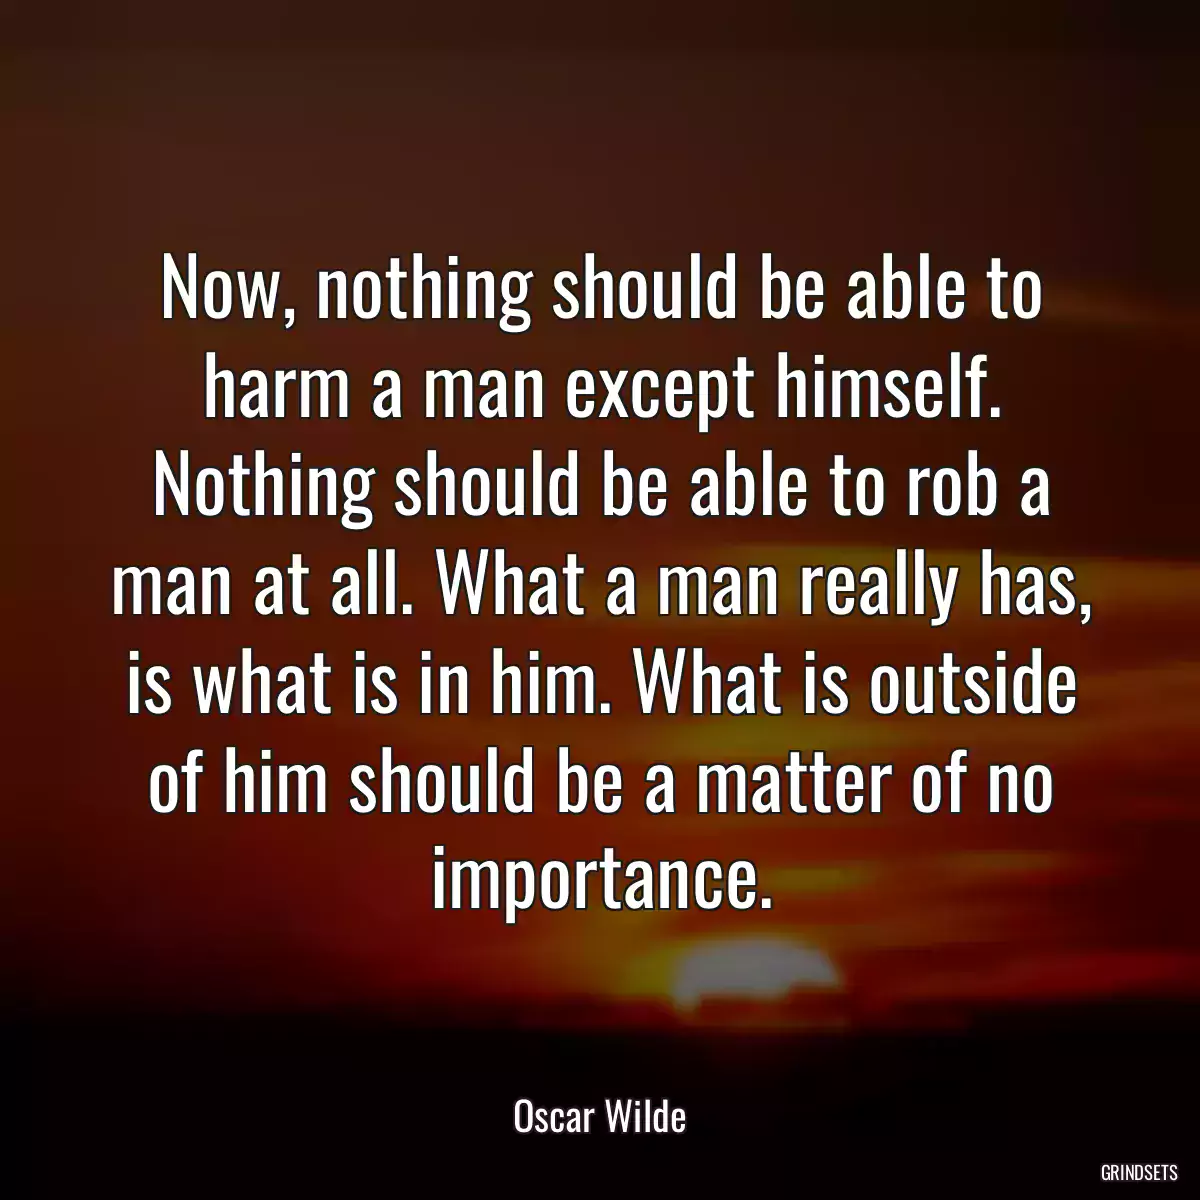 Now, nothing should be able to harm a man except himself. Nothing should be able to rob a man at all. What a man really has, is what is in him. What is outside of him should be a matter of no importance.